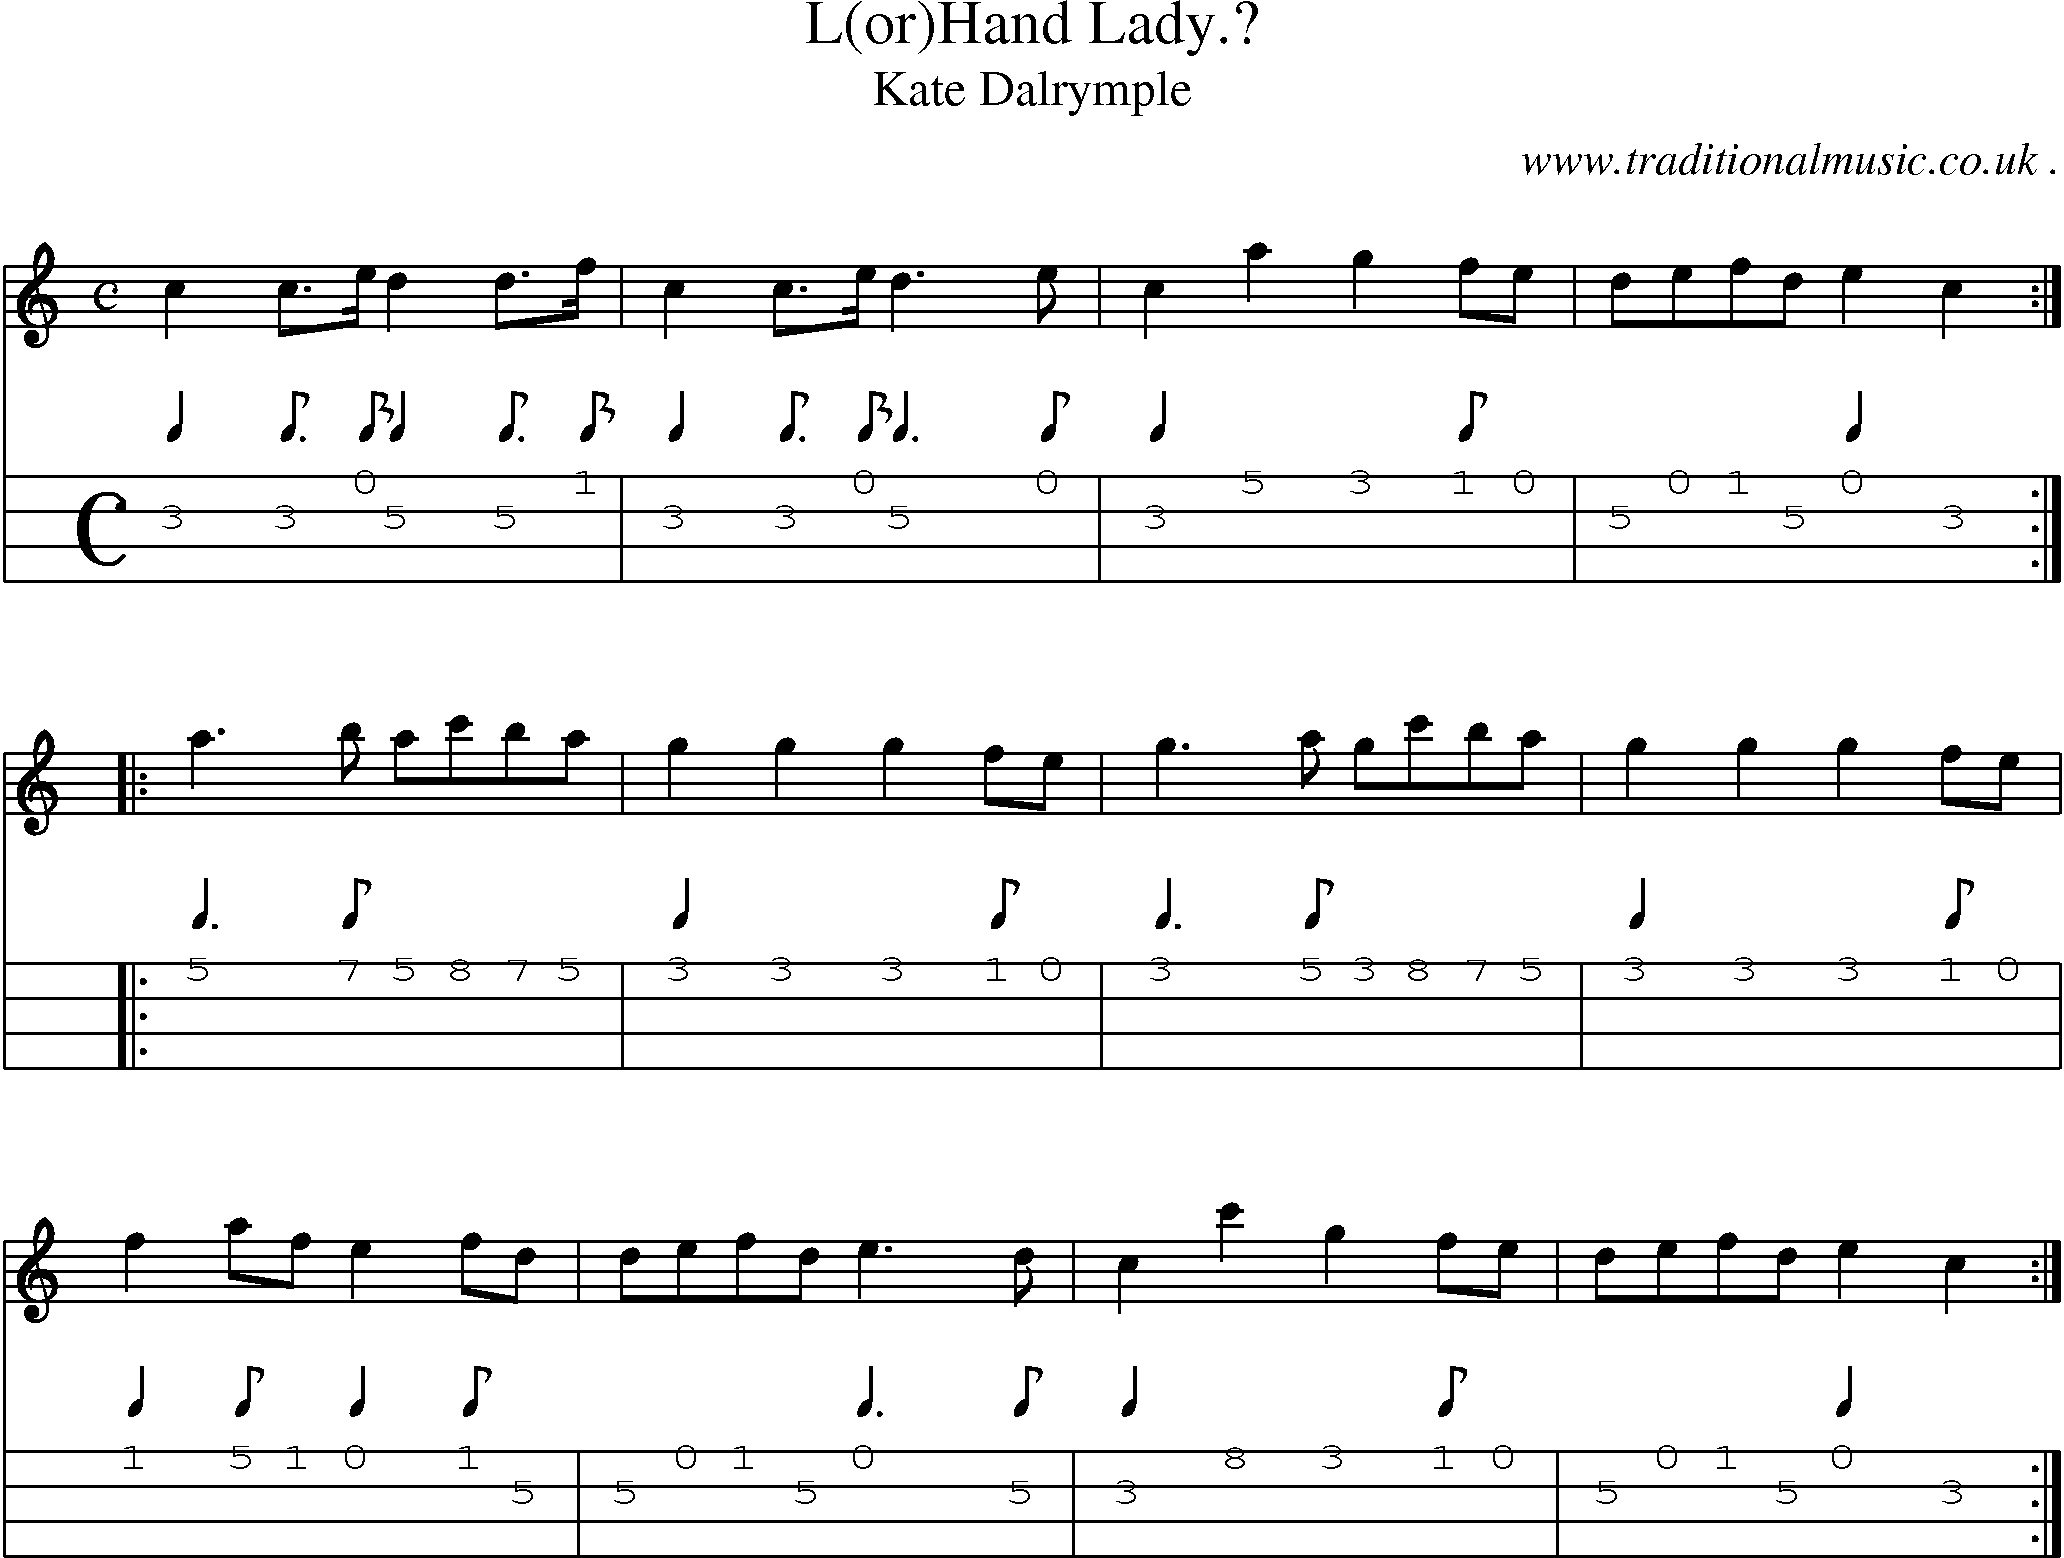 Sheet-Music and Mandolin Tabs for L(or)hand Lady